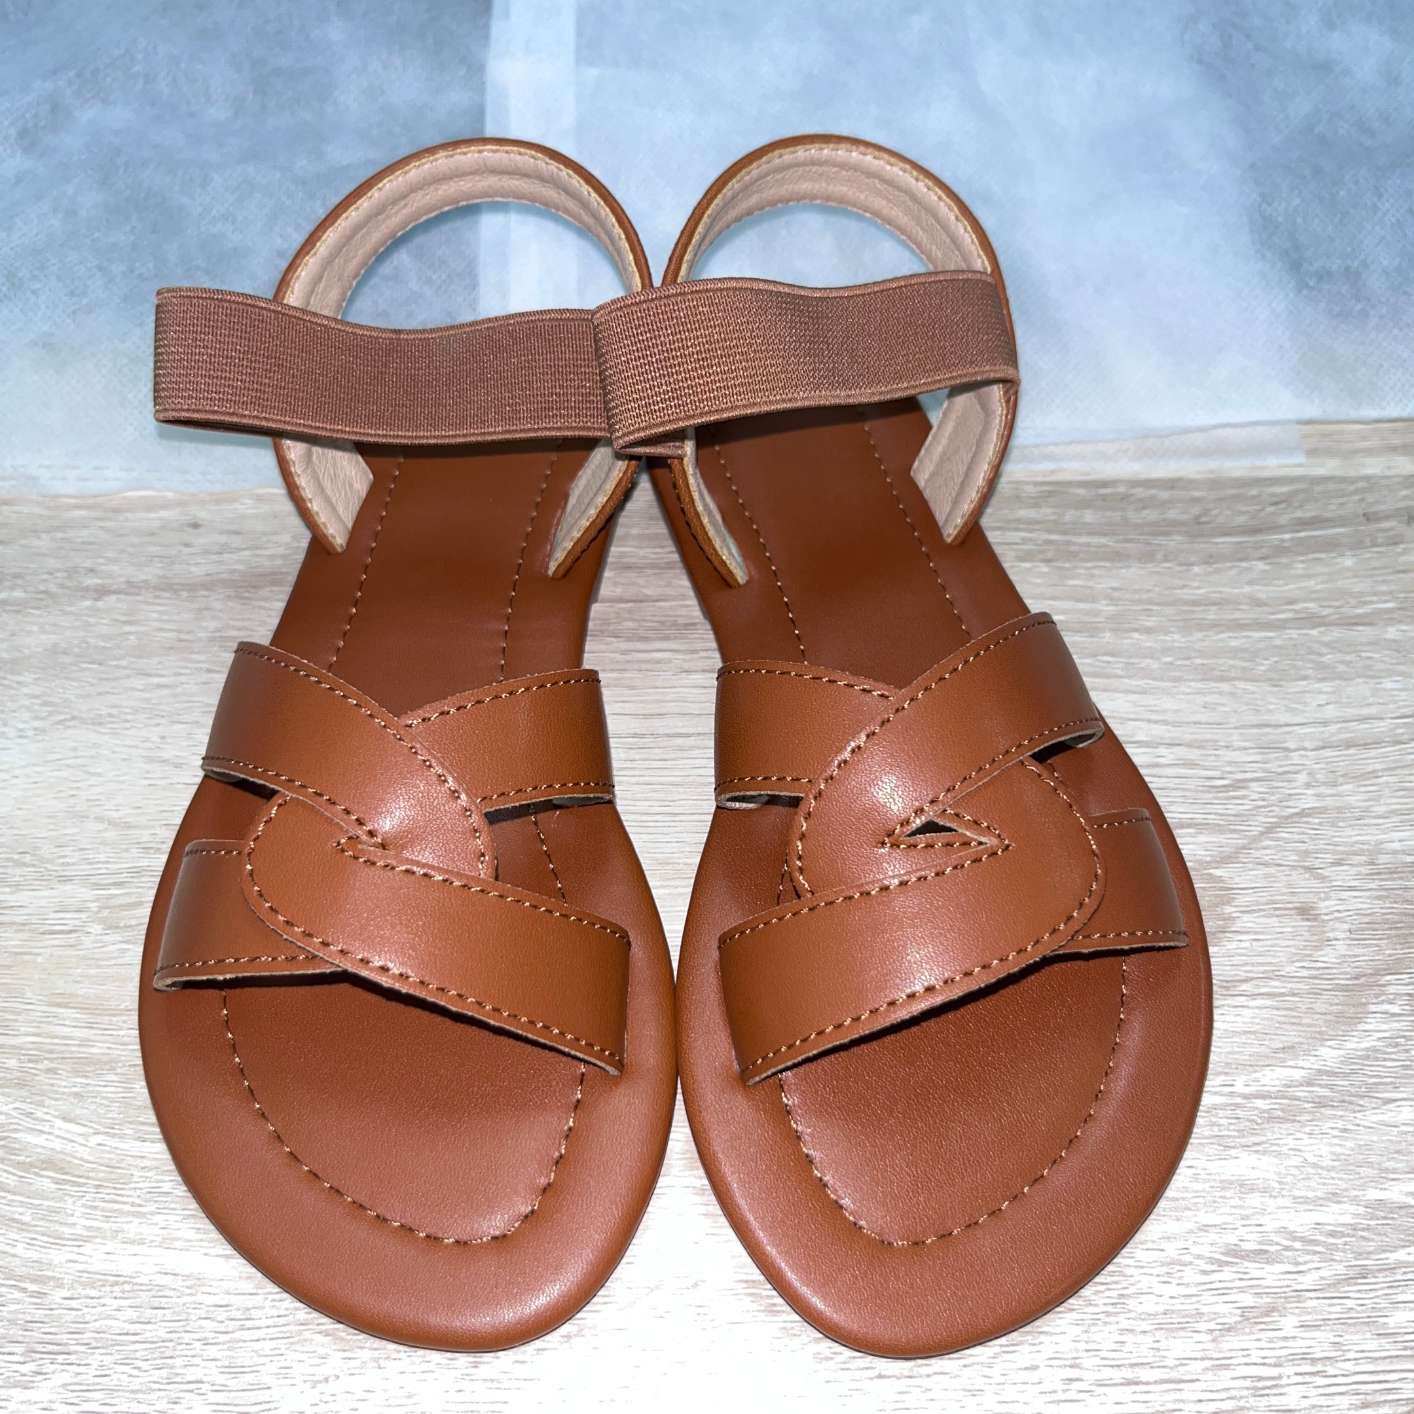 Girls Boys Children Beach Shoes Fashion Retro Style Soft-Soled Pu Leather Casual Sandals for Kids 